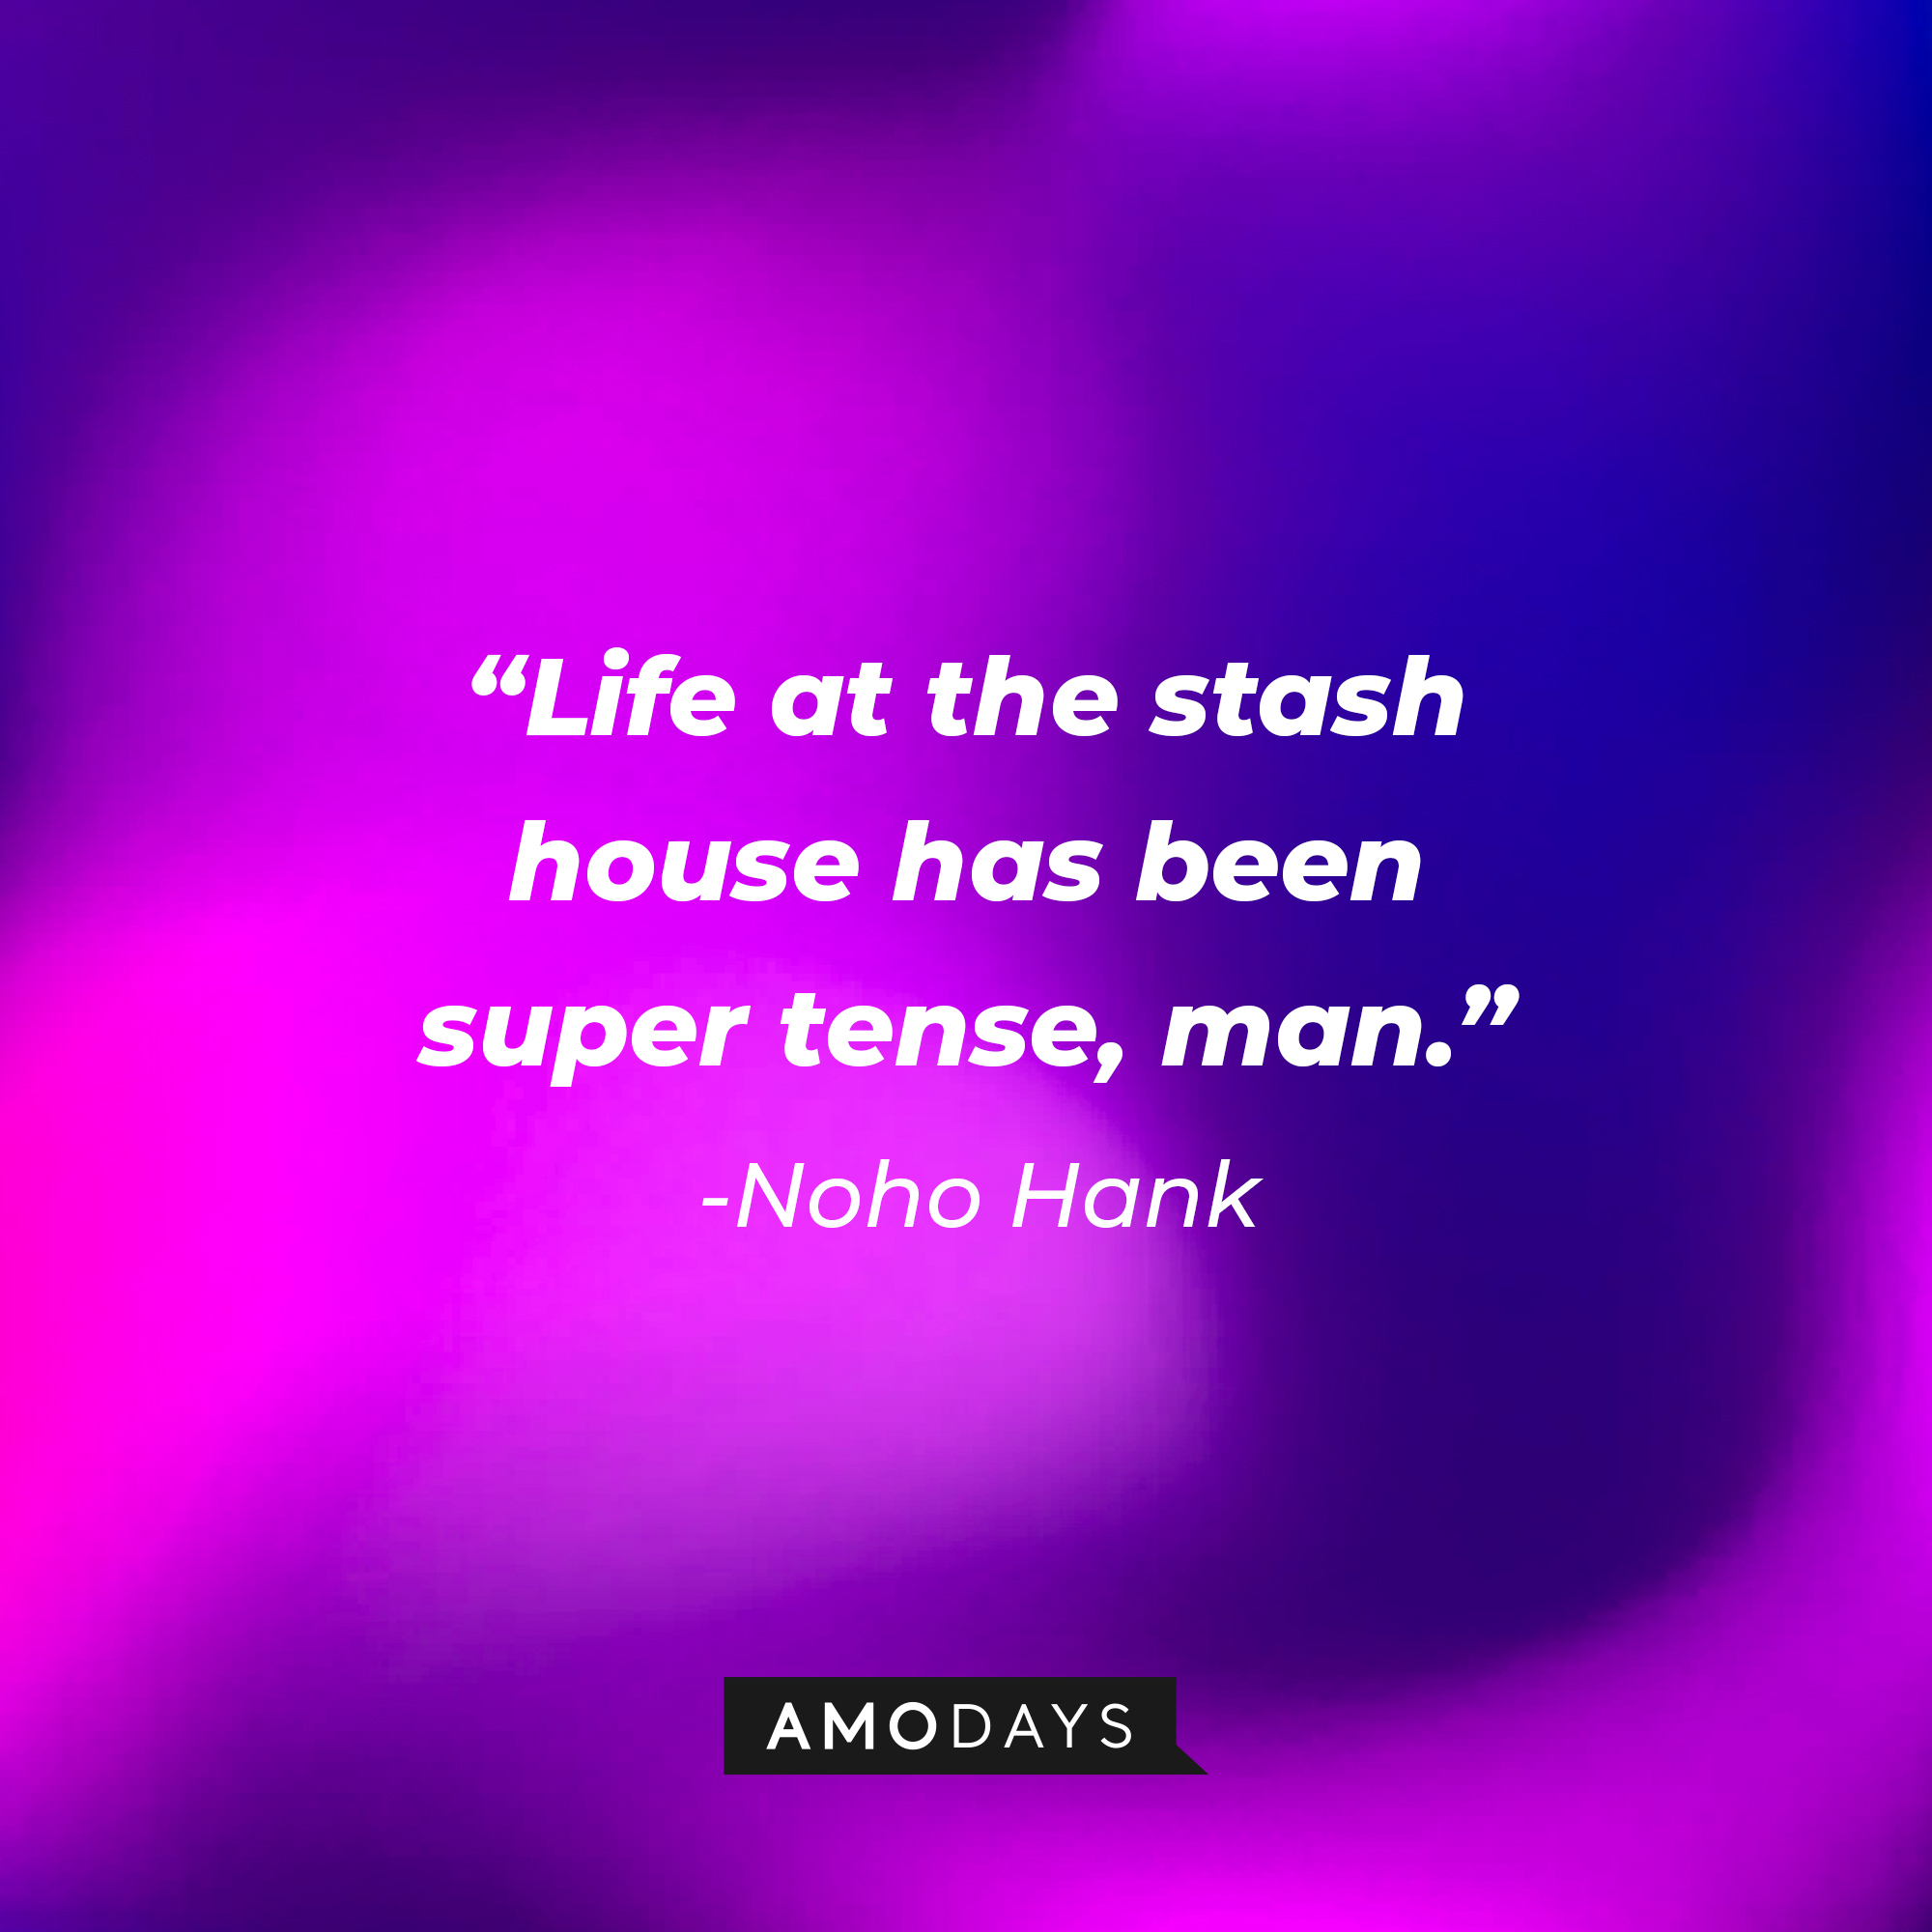 NoHo Hank, with his quote: “Life at the stash house has been super tense, man.” | Source: AmoDays